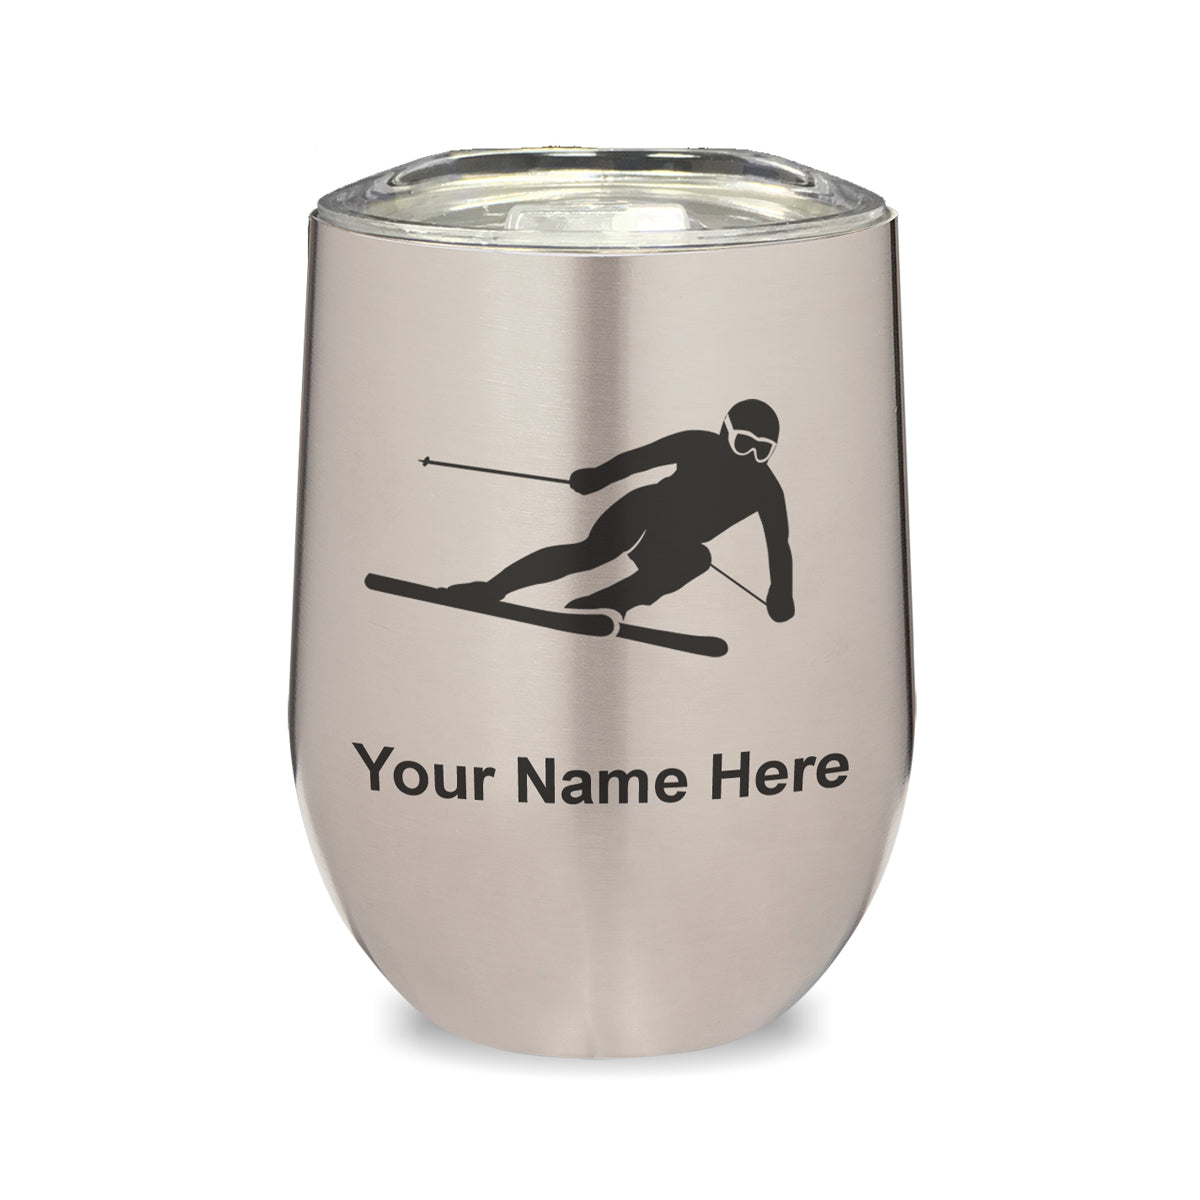 LaserGram Double Wall Stainless Steel Wine Glass, Skier Downhill, Personalized Engraving Included